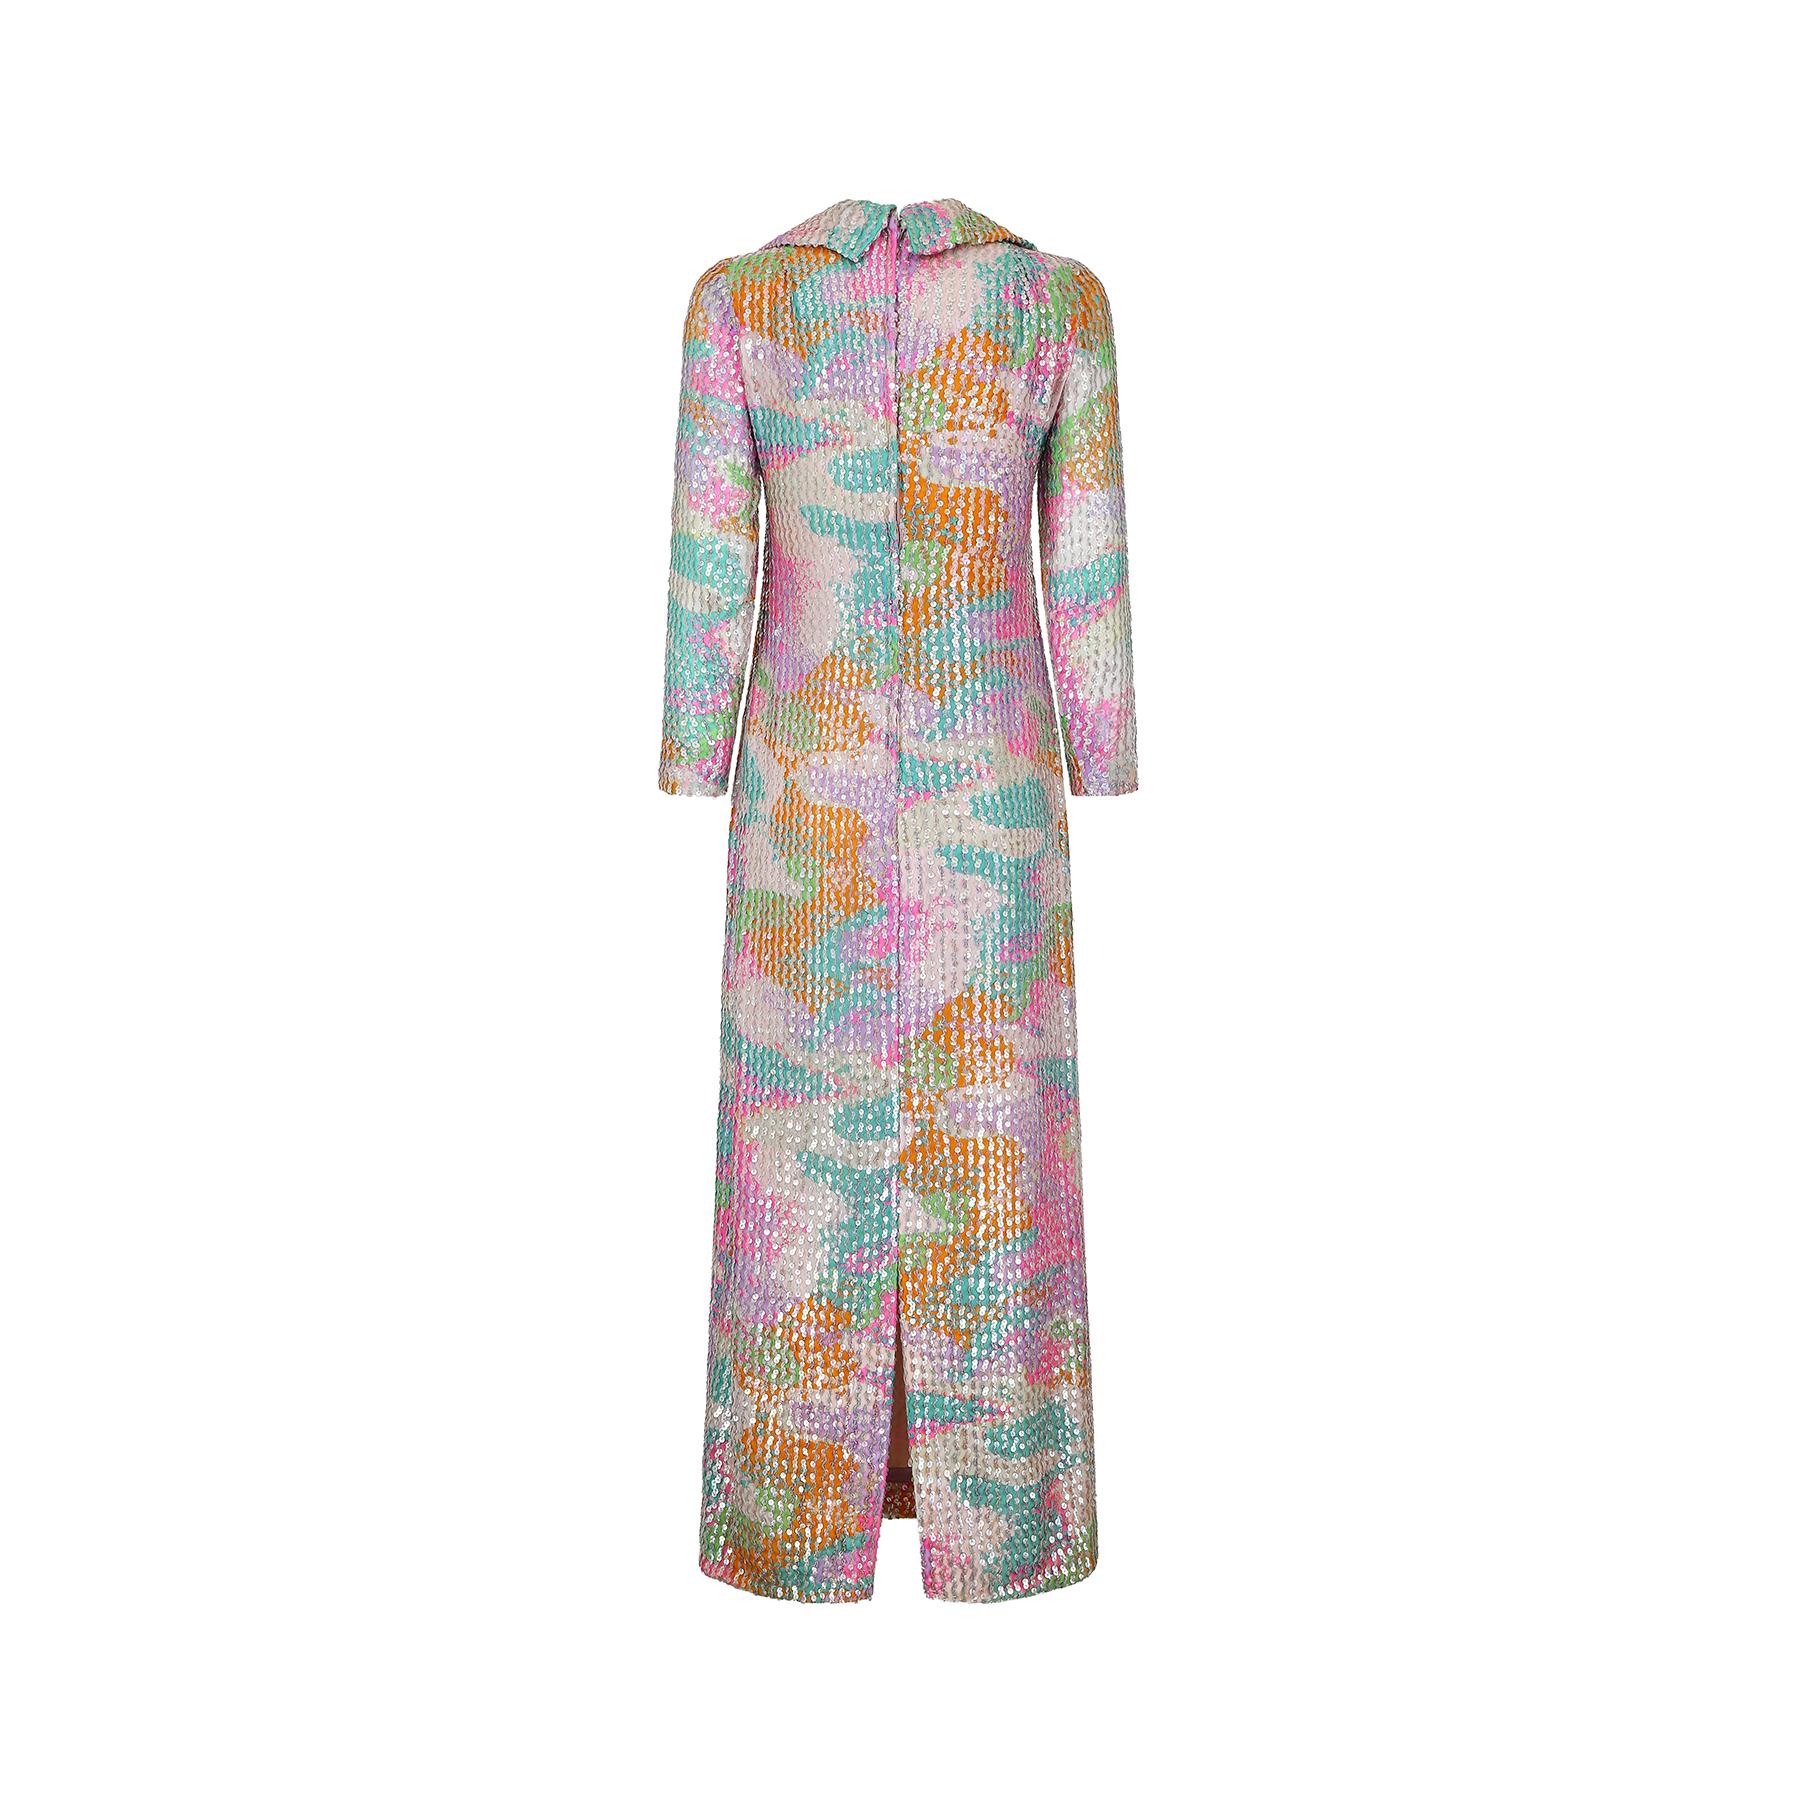 Superb quality Lee Jordan of New York all over floral sequinned three quarter length column dress.  Lee Jordan made very high end department store occasion wear for the affluent American market from the 1960s through to the 1980s.  This dress is